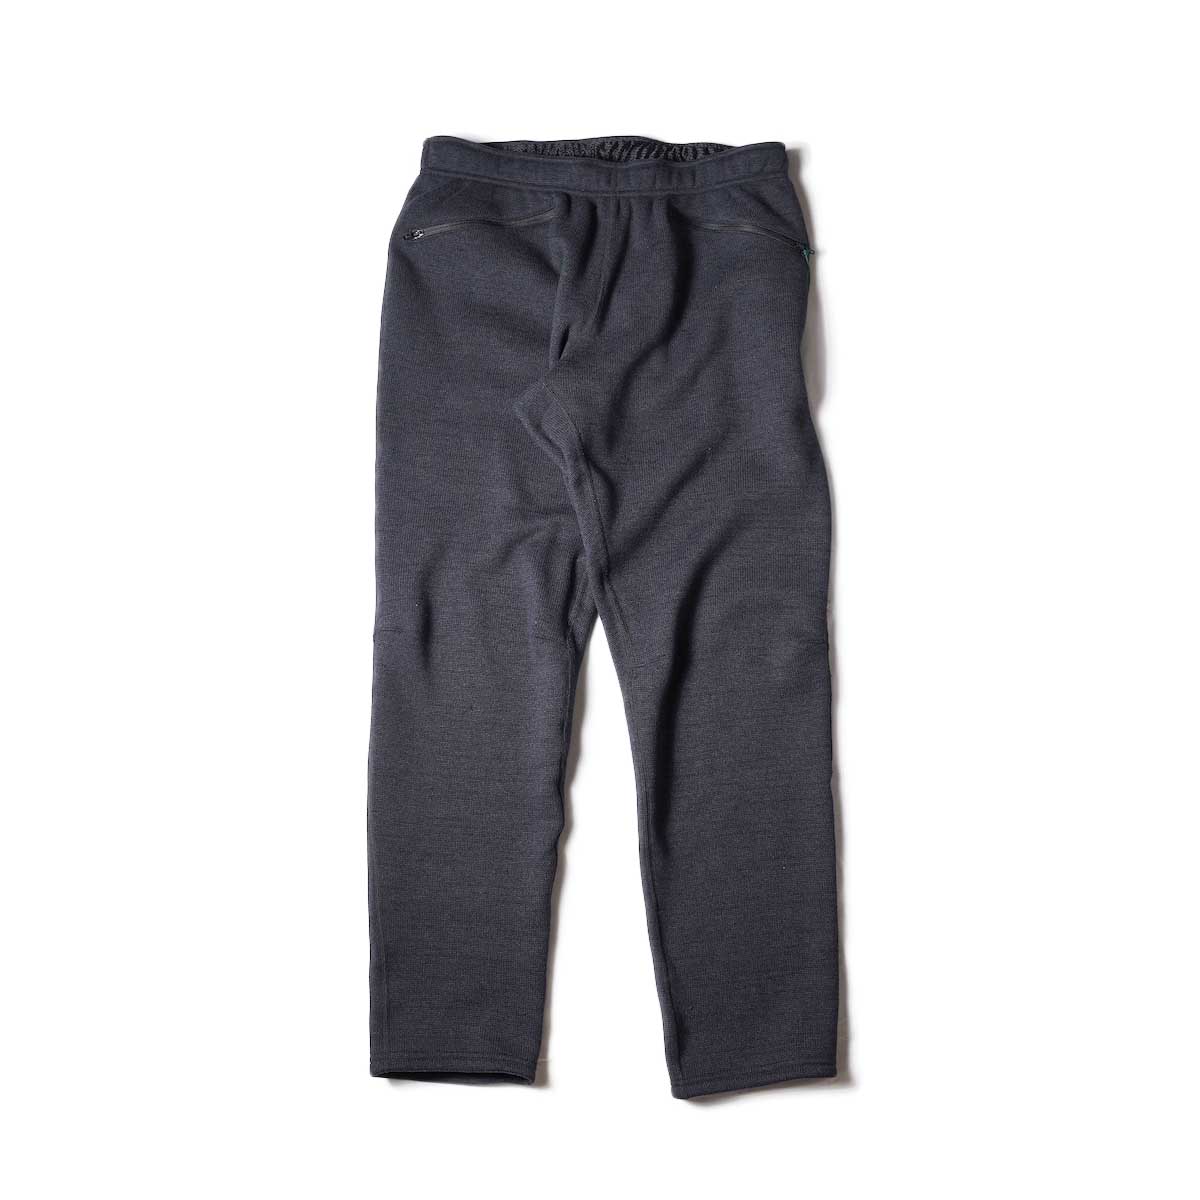 South2 West8 / 2P Cycle Pant - POLARTEC Fleece Lined Jersey (Black)正面